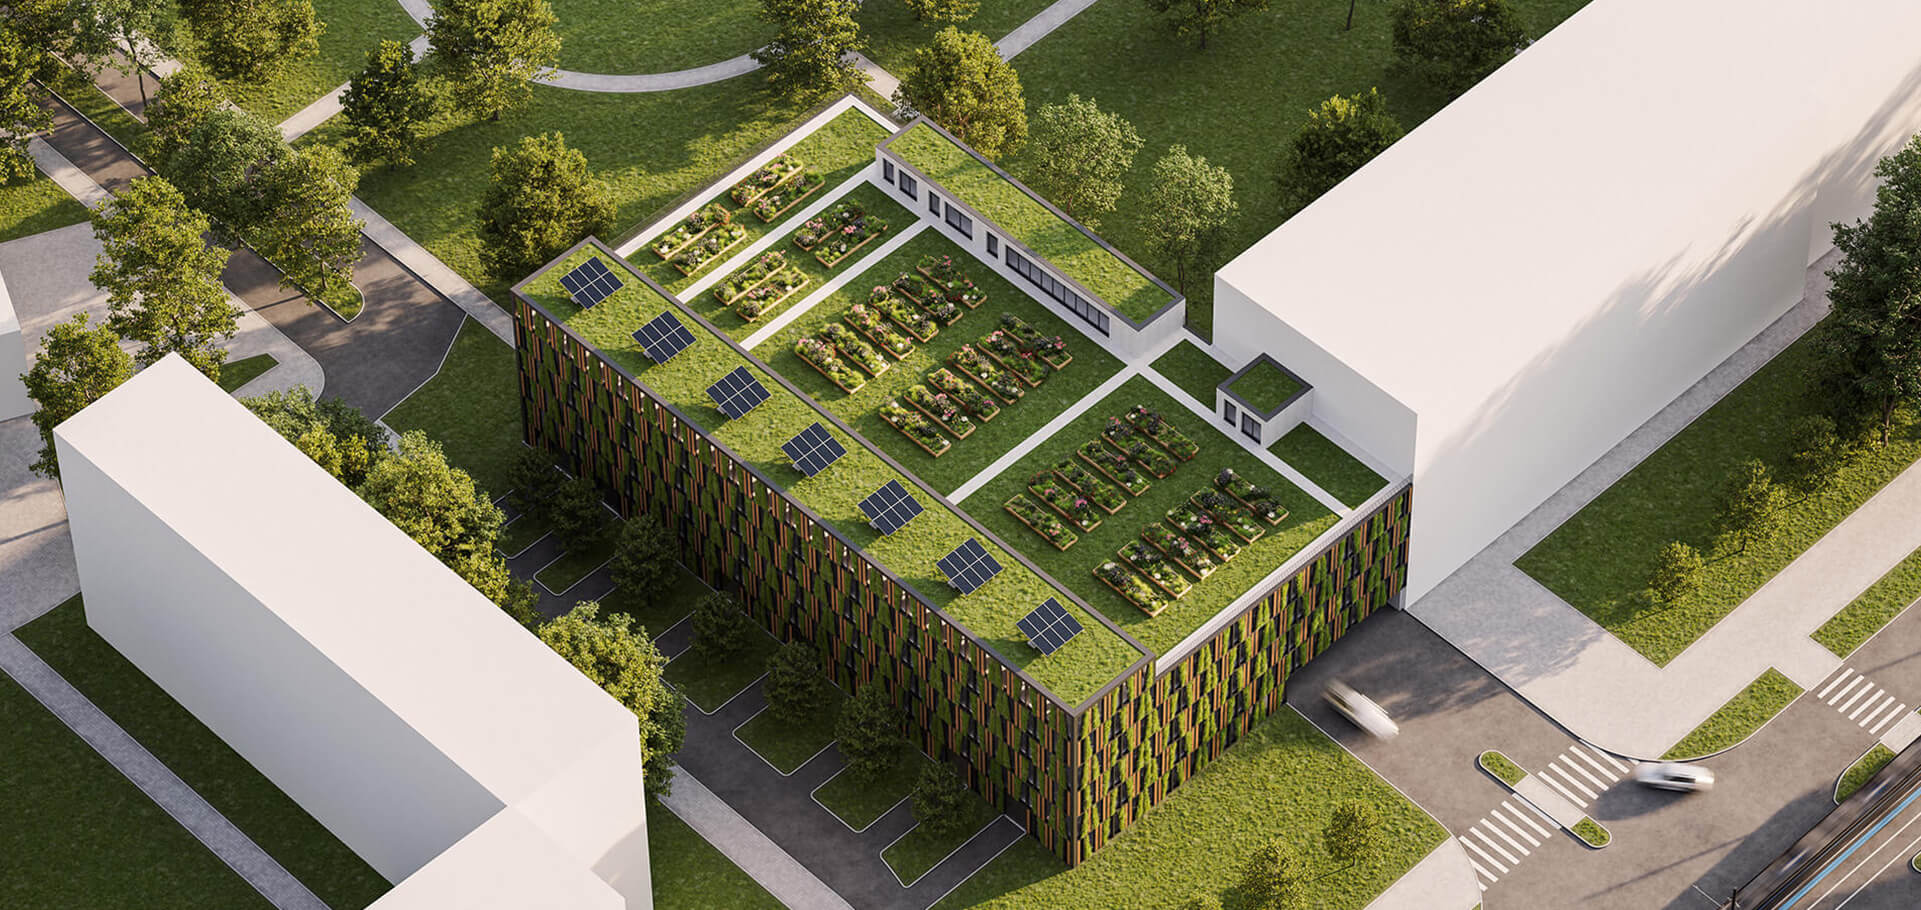 Parking towers enable more green space through space efficiency